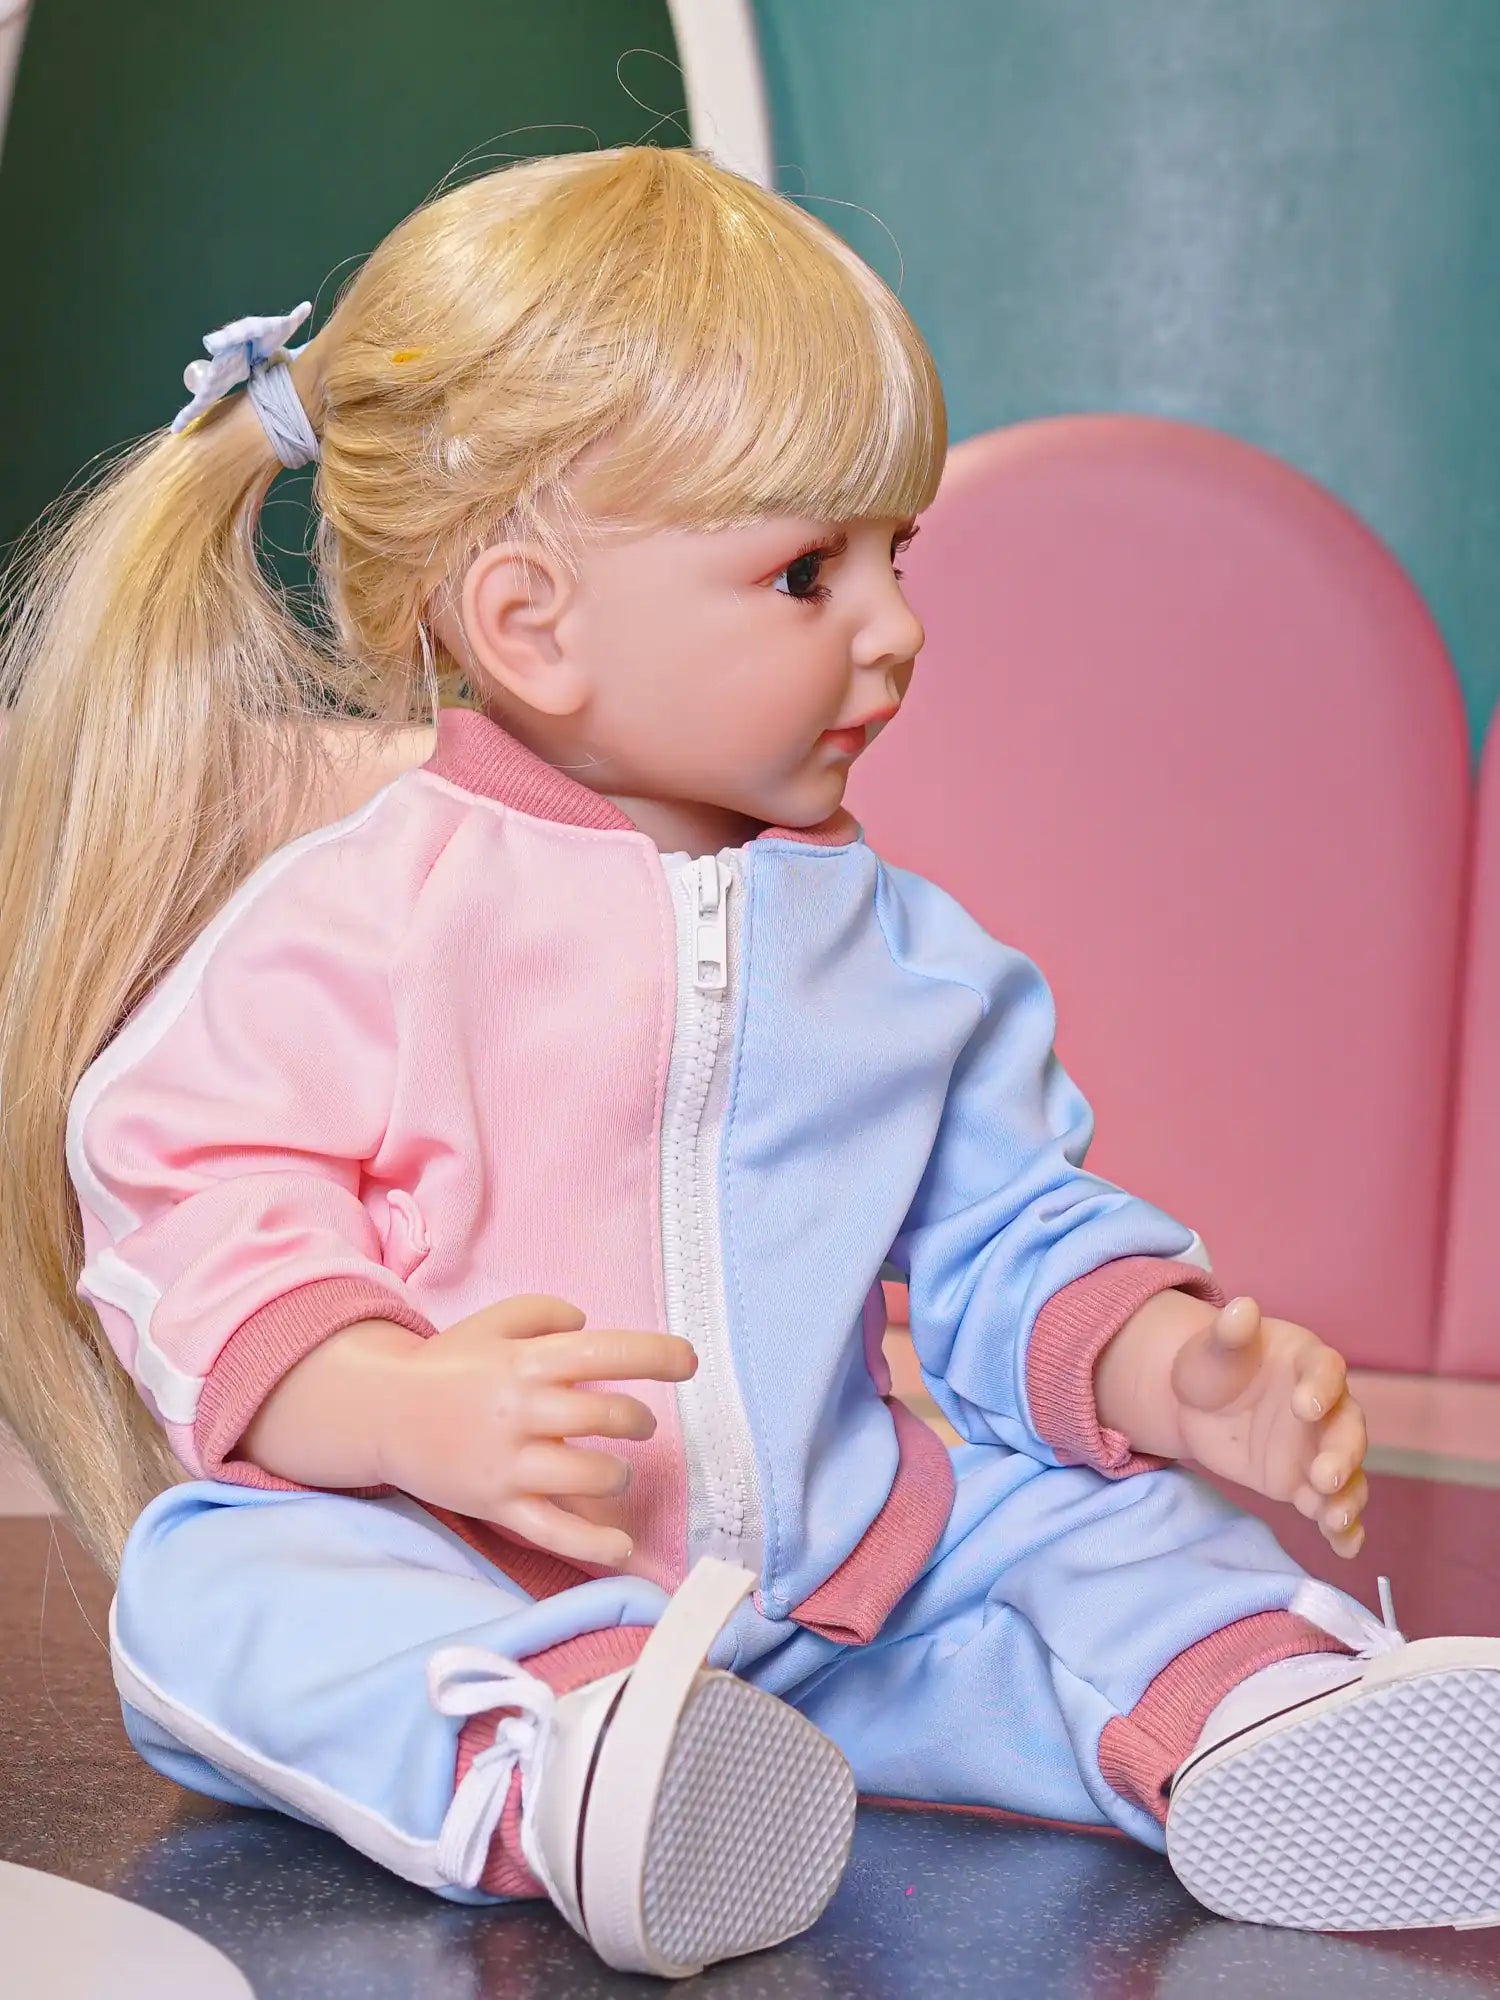 Doll with blonde bob and pastel tracksuit, seated on the floor.